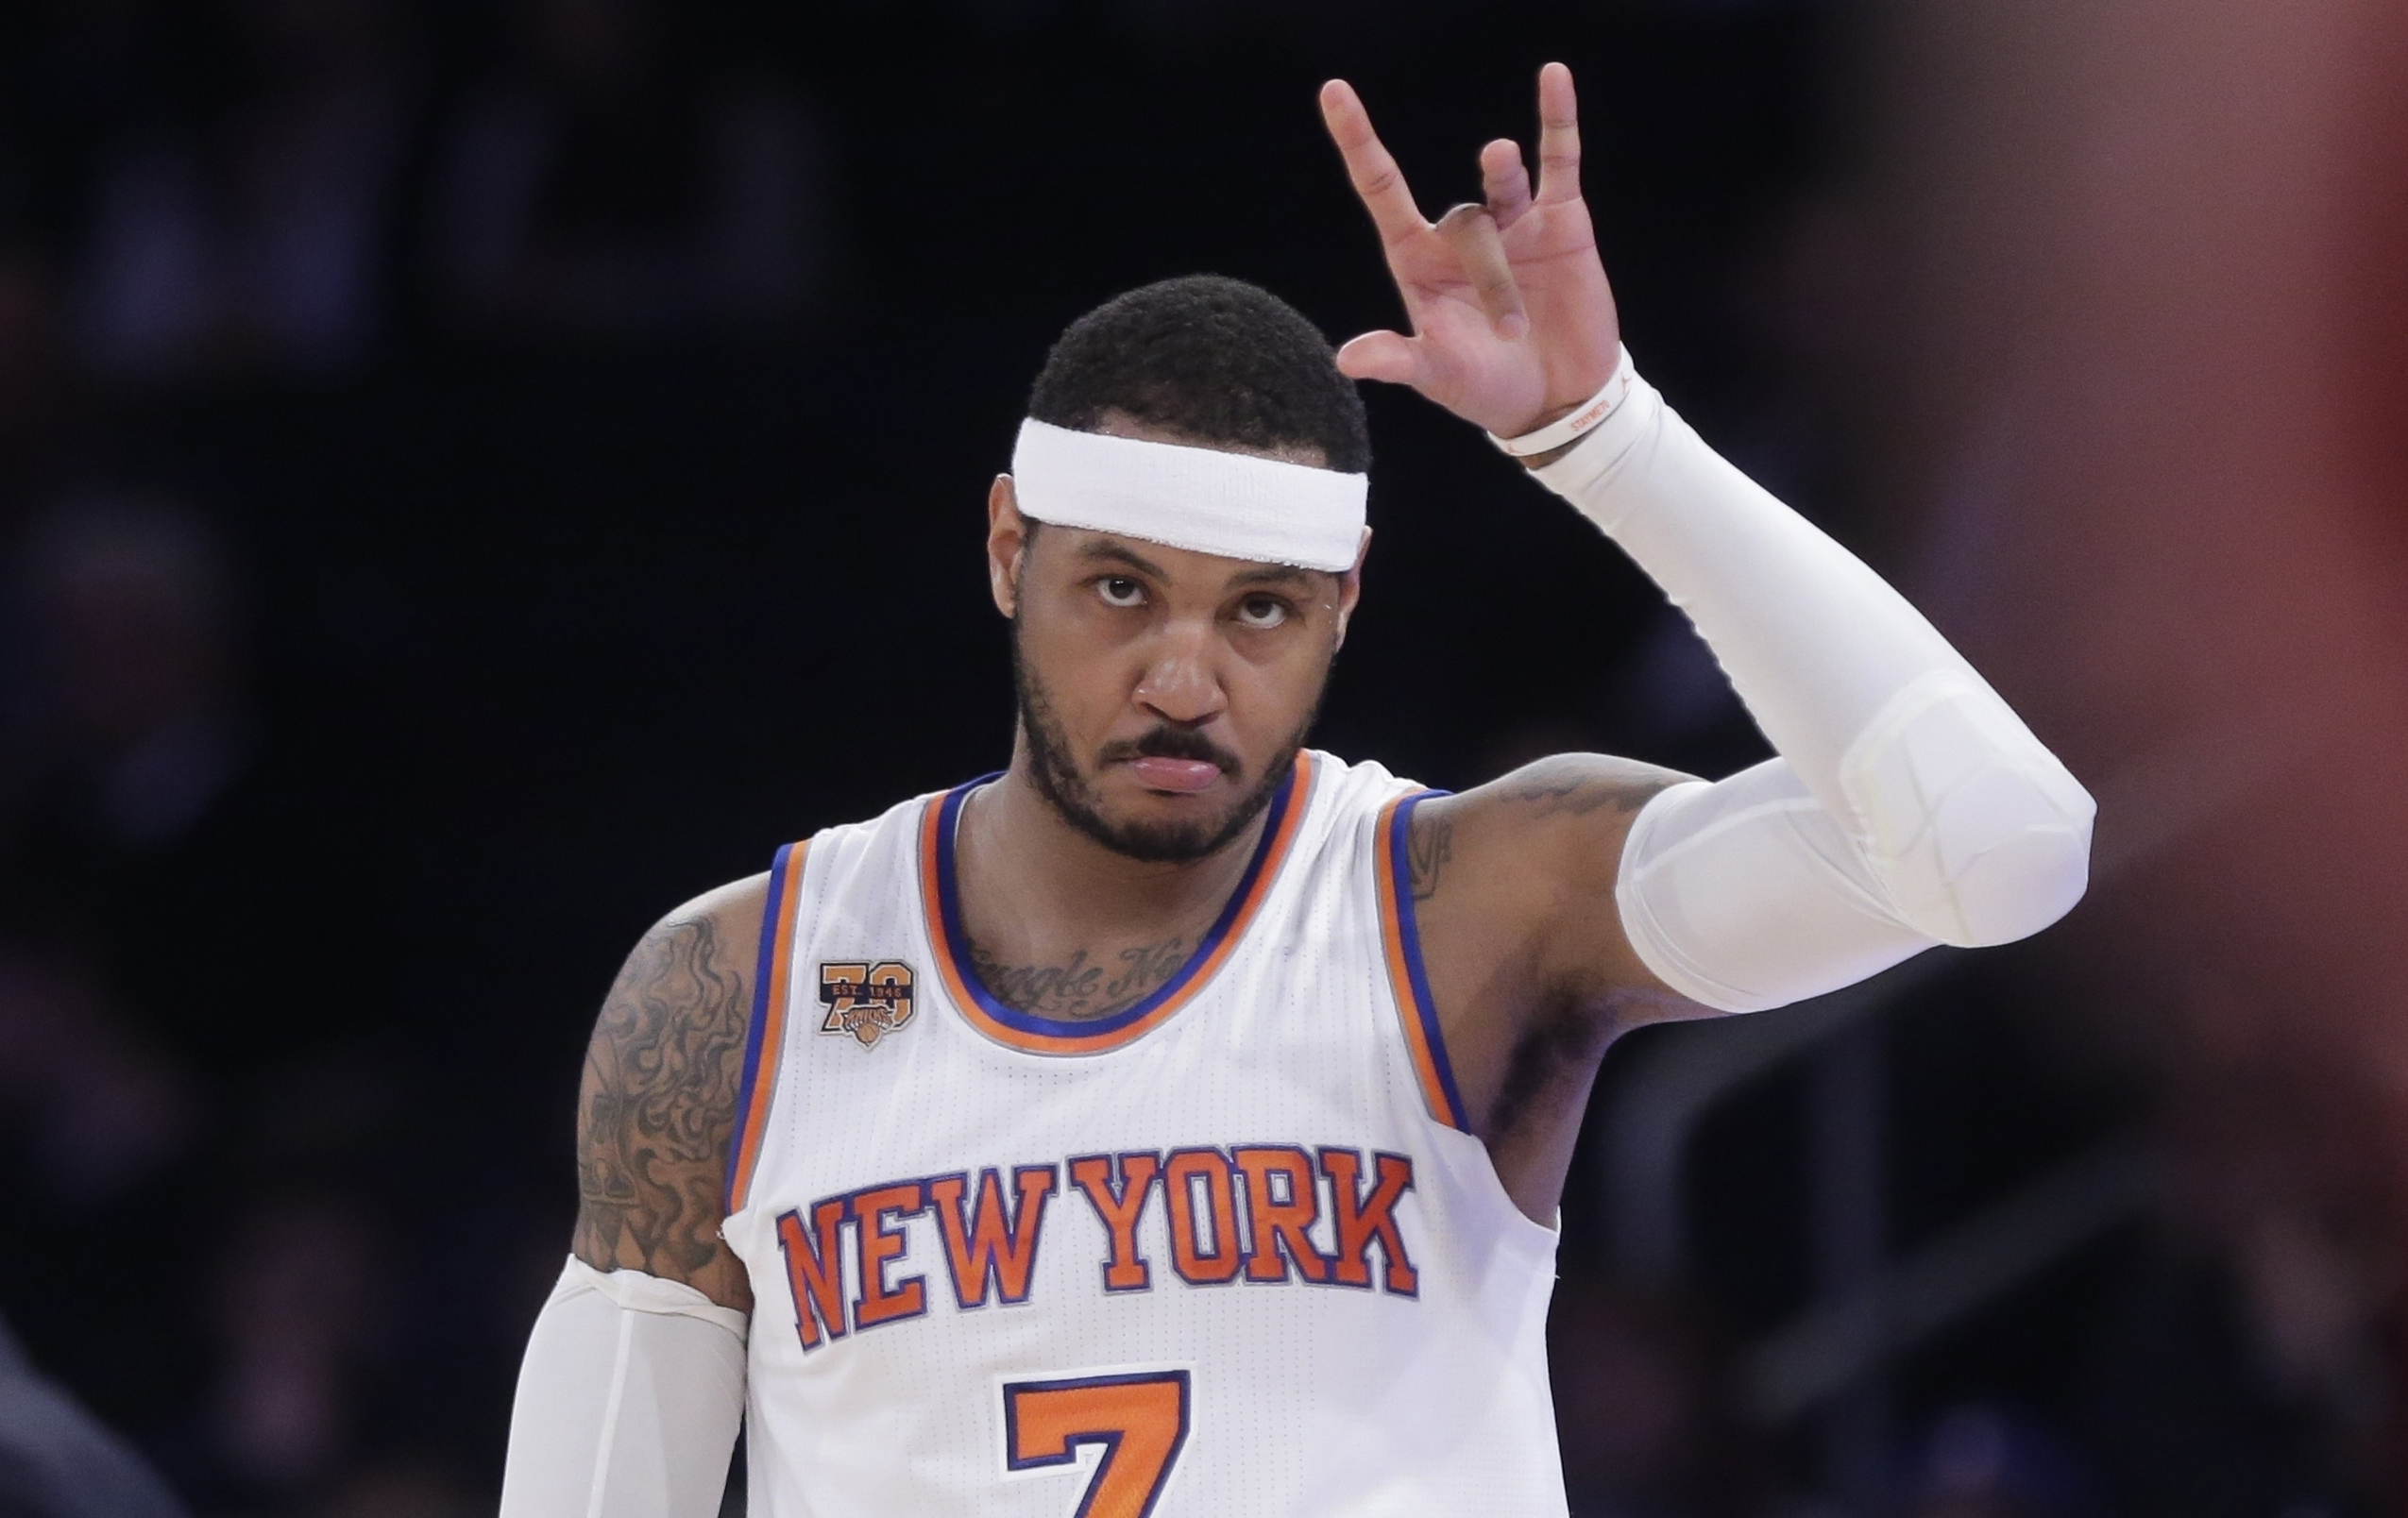 Is Something Going on Between Carmelo Anthony and the New York Knicks?